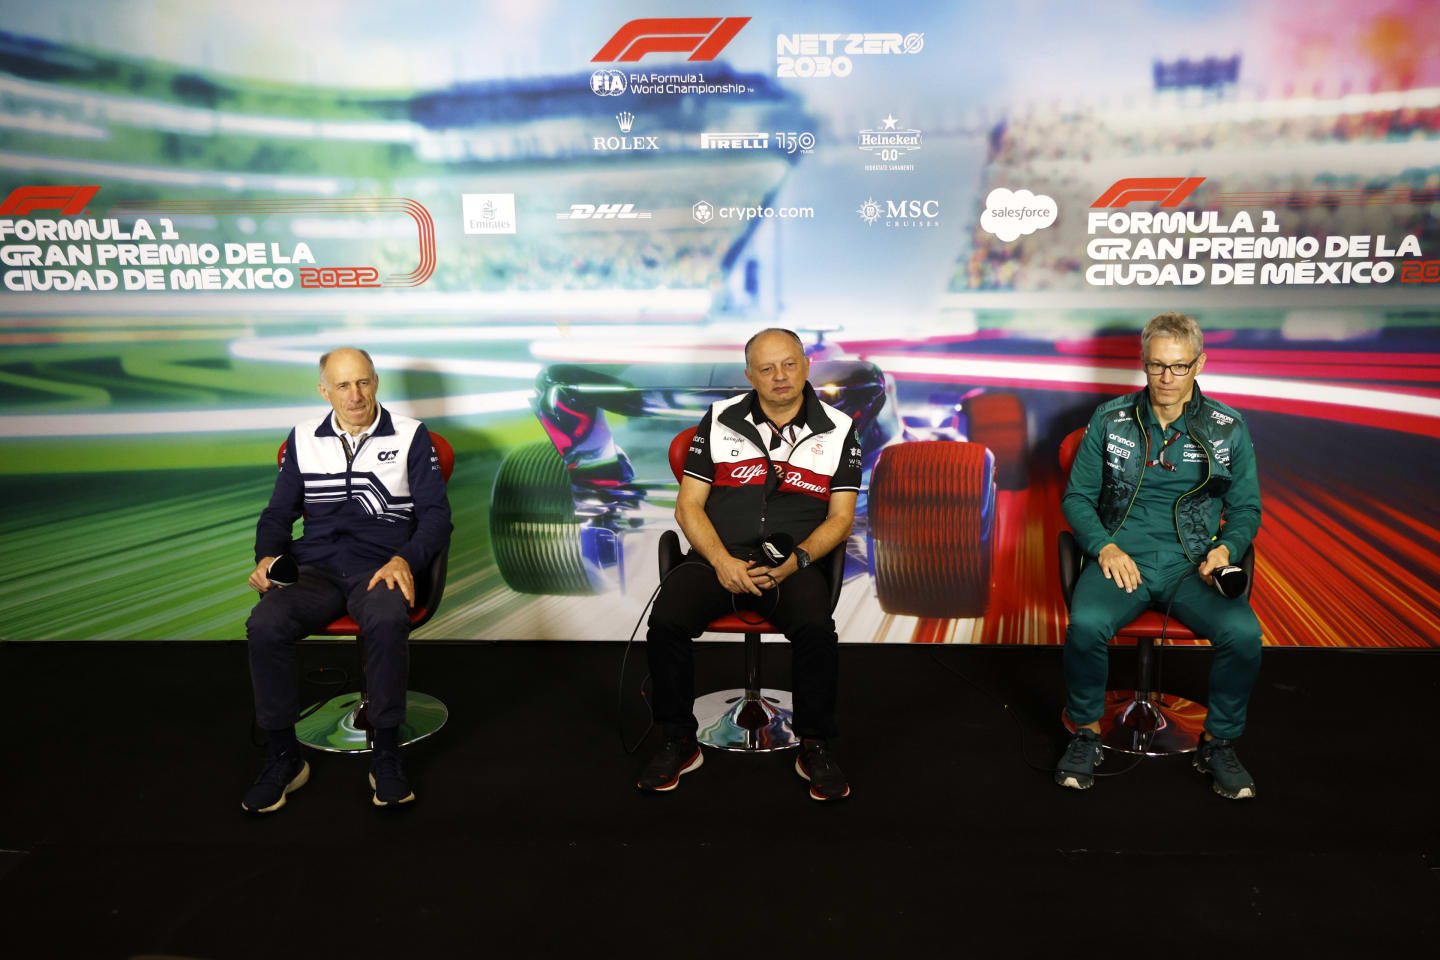 MEXICO CITY, MEXICO - OCTOBER 29: (L-R) Scuderia AlphaTauri Team Principal Franz Tost, Alfa Romeo Racing Team Principal Frederic Vasseur and Mike Krack, Team Principal of the Aston Martin F1 Team attend the Team Principals Press Conference prior to final practice ahead of the F1 Grand Prix of Mexico at Autodromo Hermanos Rodriguez on October 29, 2022 in Mexico City, Mexico. (Photo by Chris Graythen/Getty Images)